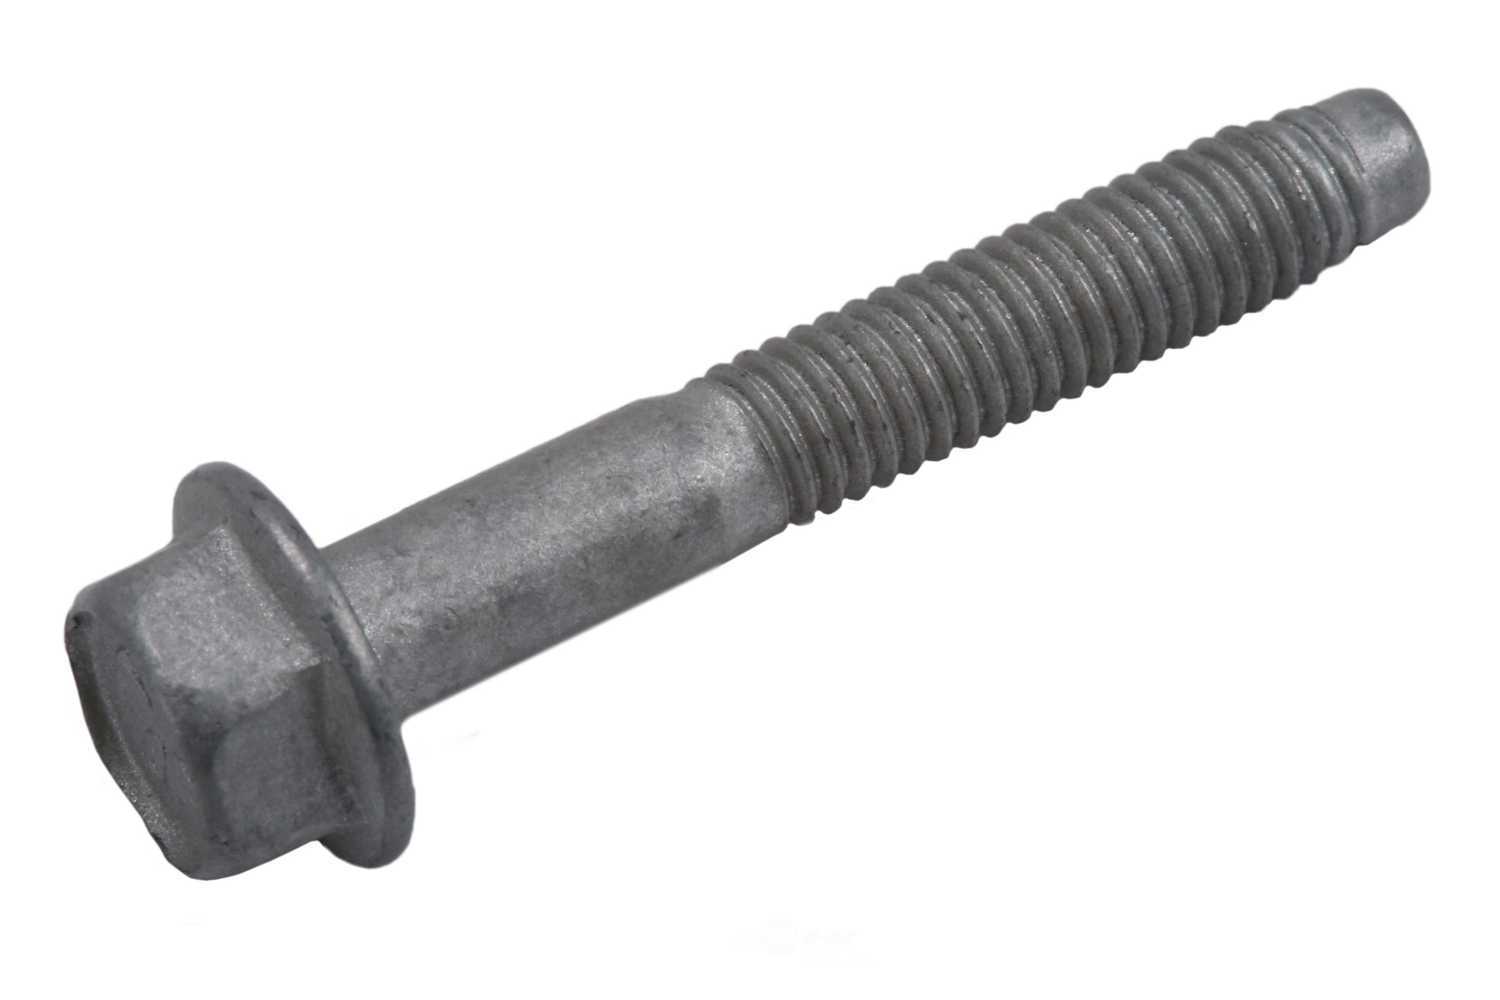 GM GENUINE PARTS CANADA - Engine Oil Cooler Adapter Bolt - GMC 11588716